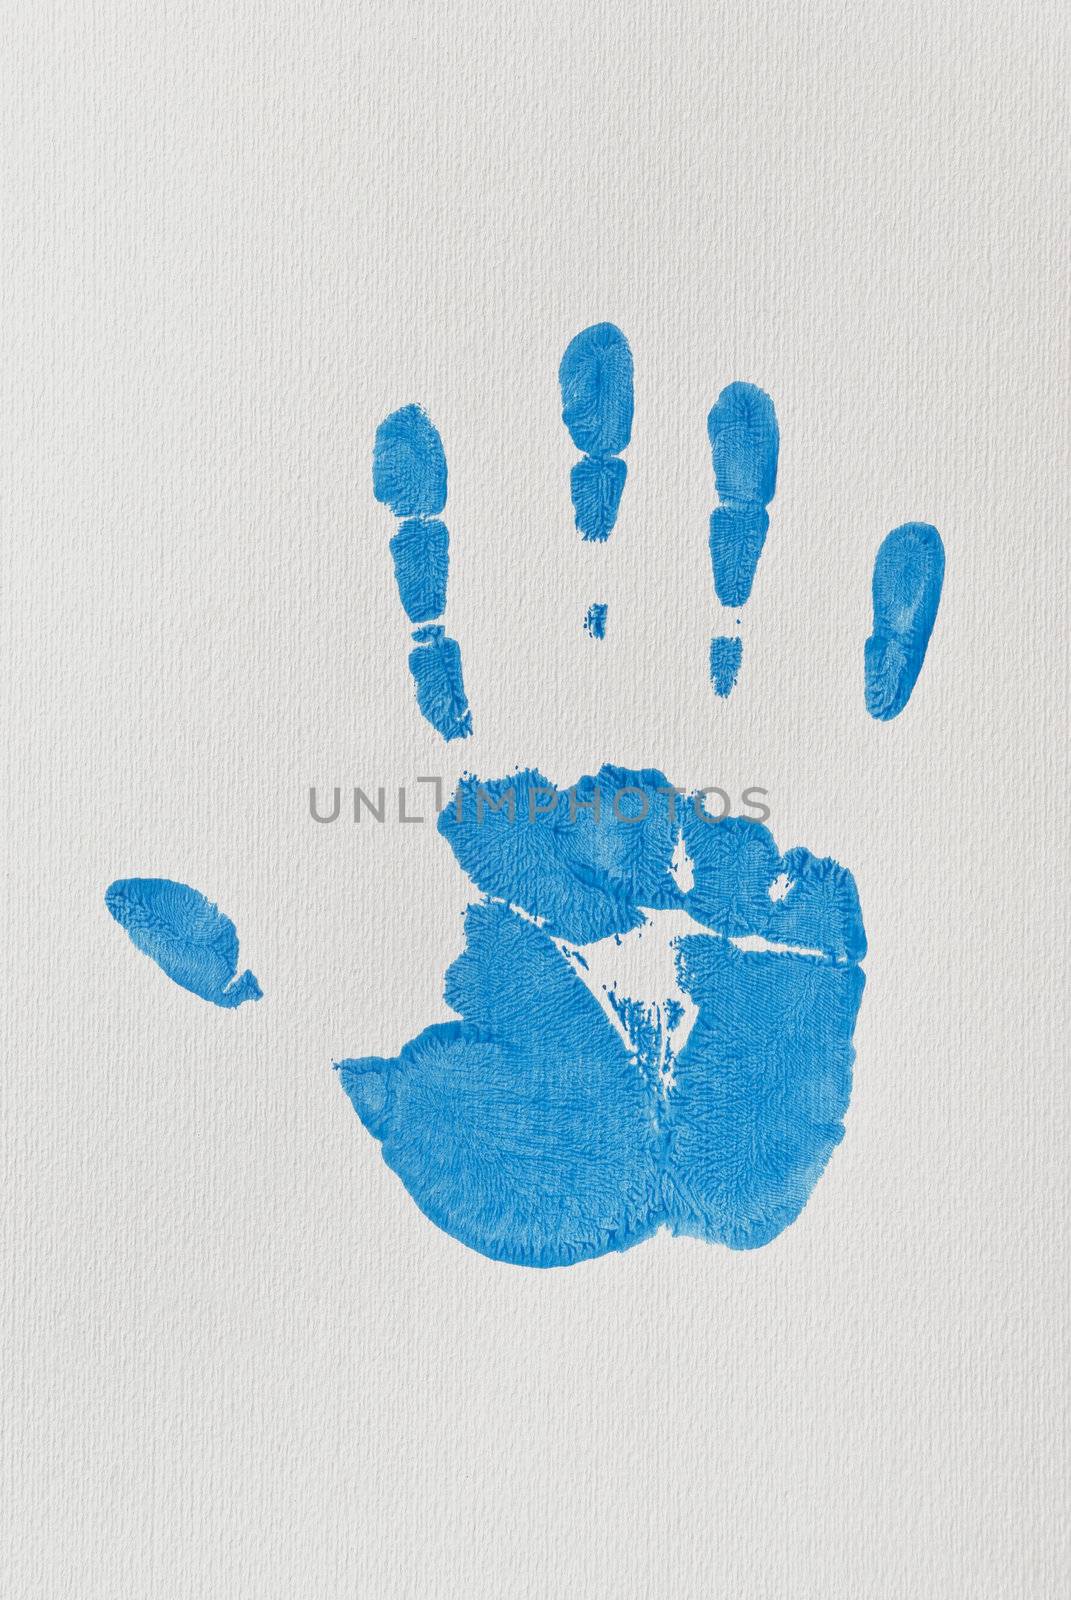 Blue Right Hand-print on Textured Paper